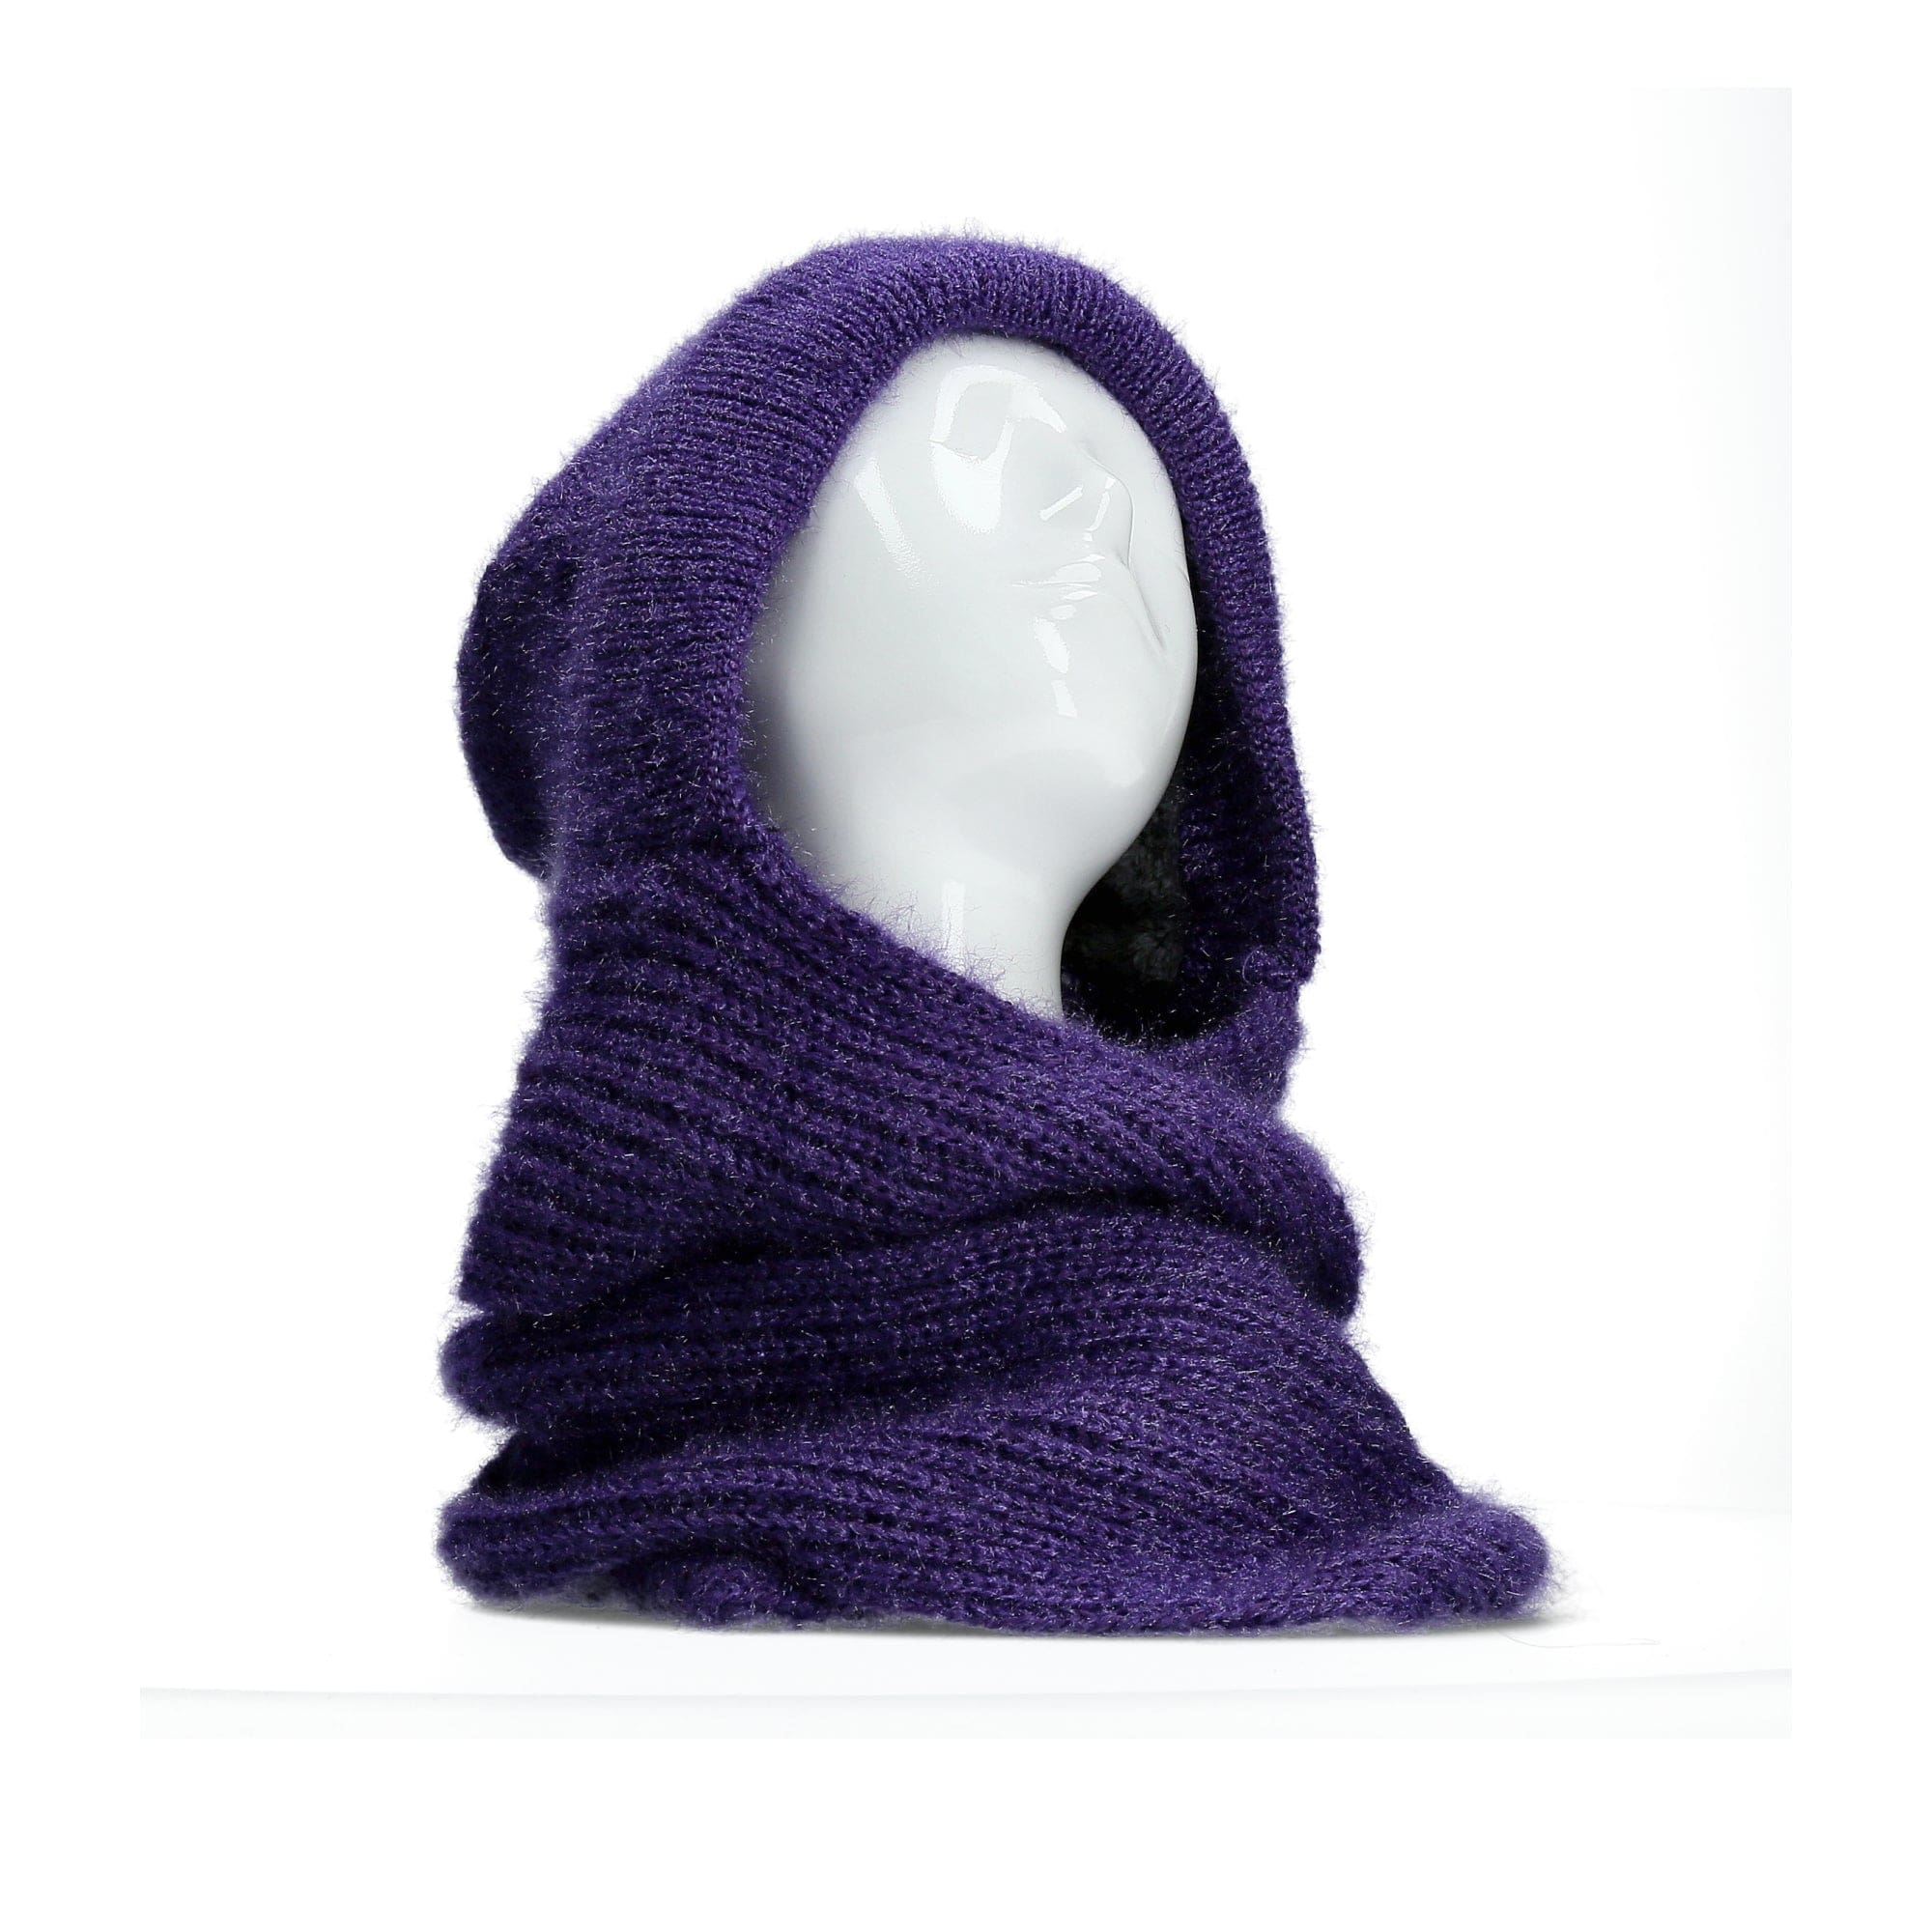 Exclusive hooded scarf - Hats